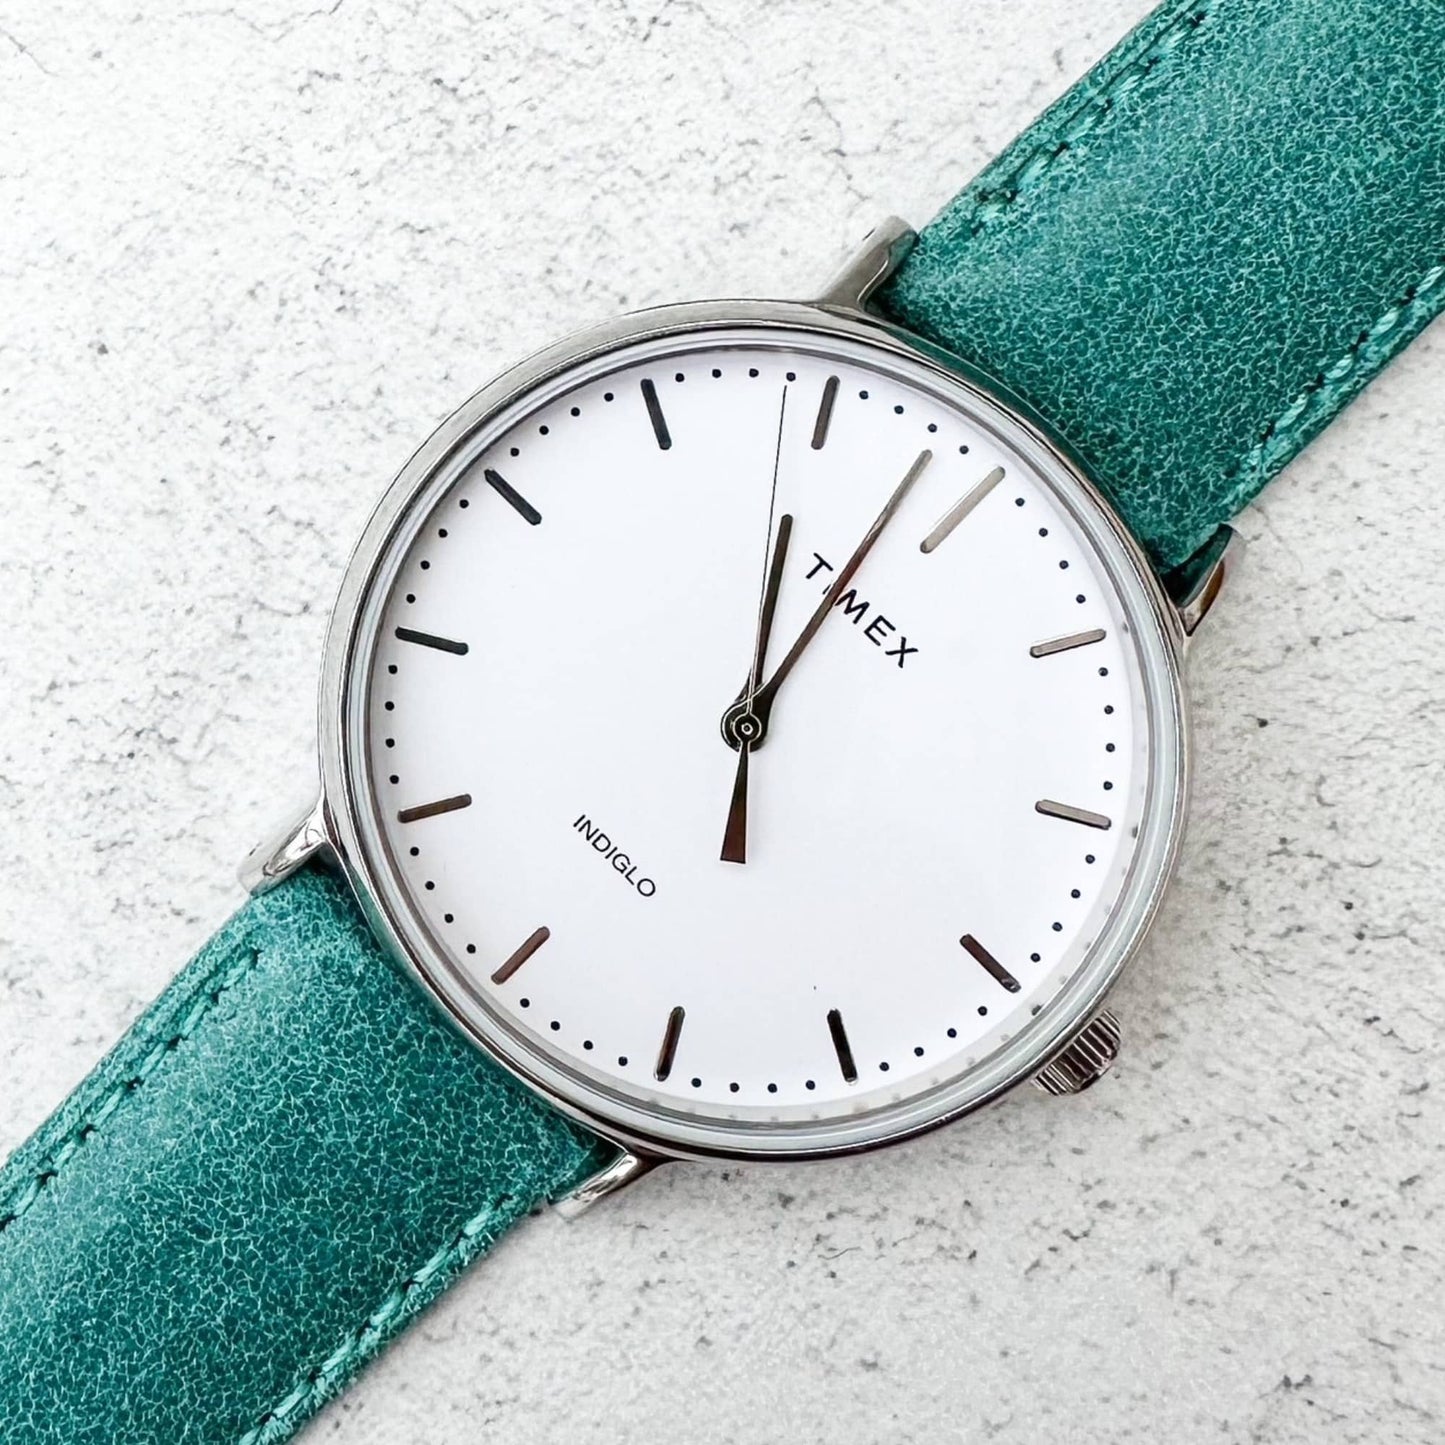 Smooth Grain Vintage Genuine Leather Watch Strap Turquoise 7